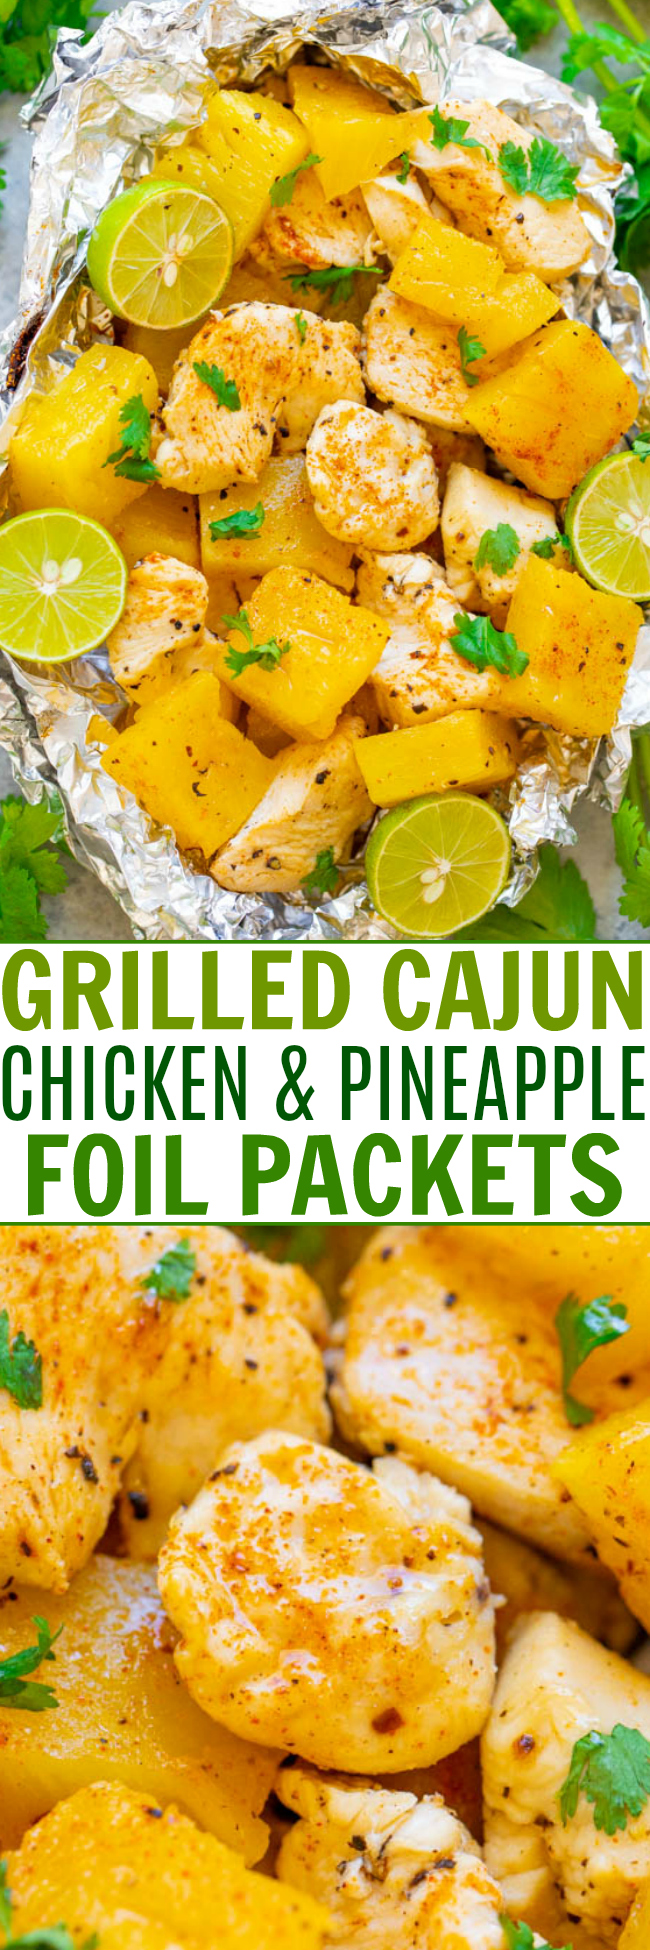 Grilled Cajun Chicken and Pineapple Foil Packets - EASY, tasty, ready in 15 minutes, HEALTHY, and since it's made in a foil pack on the grill, there's ZERO cleanup!! Perfect for easy-breezy summer meals!!